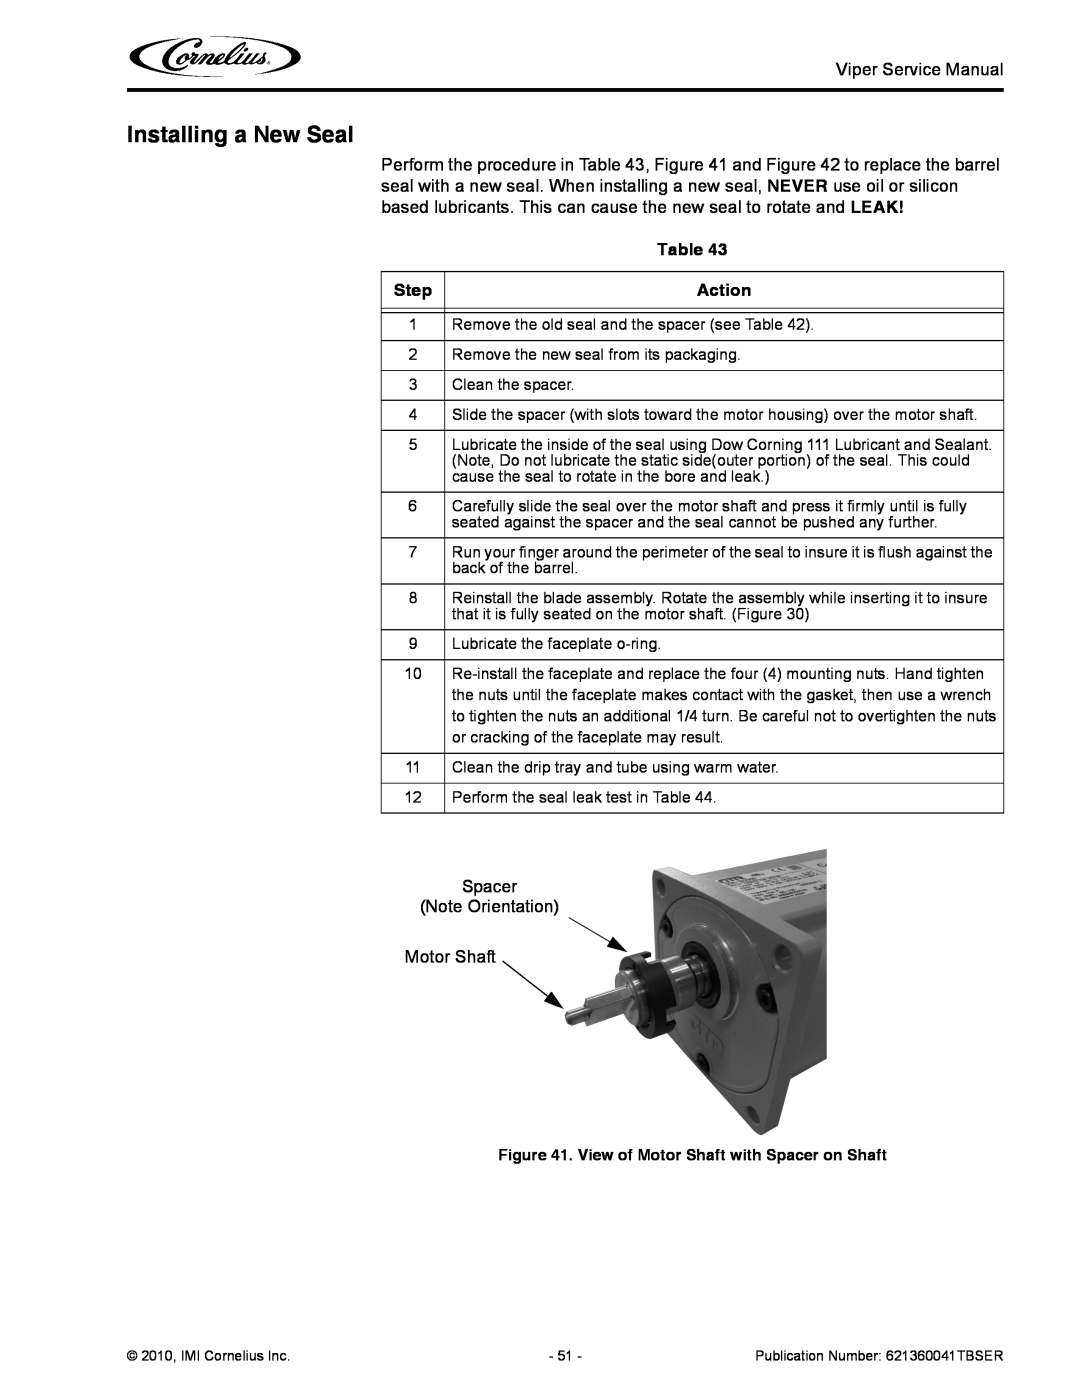 Cornelius 3 service manual Installing a New Seal, Step, Action, Spacer Note Orientation Motor Shaft 